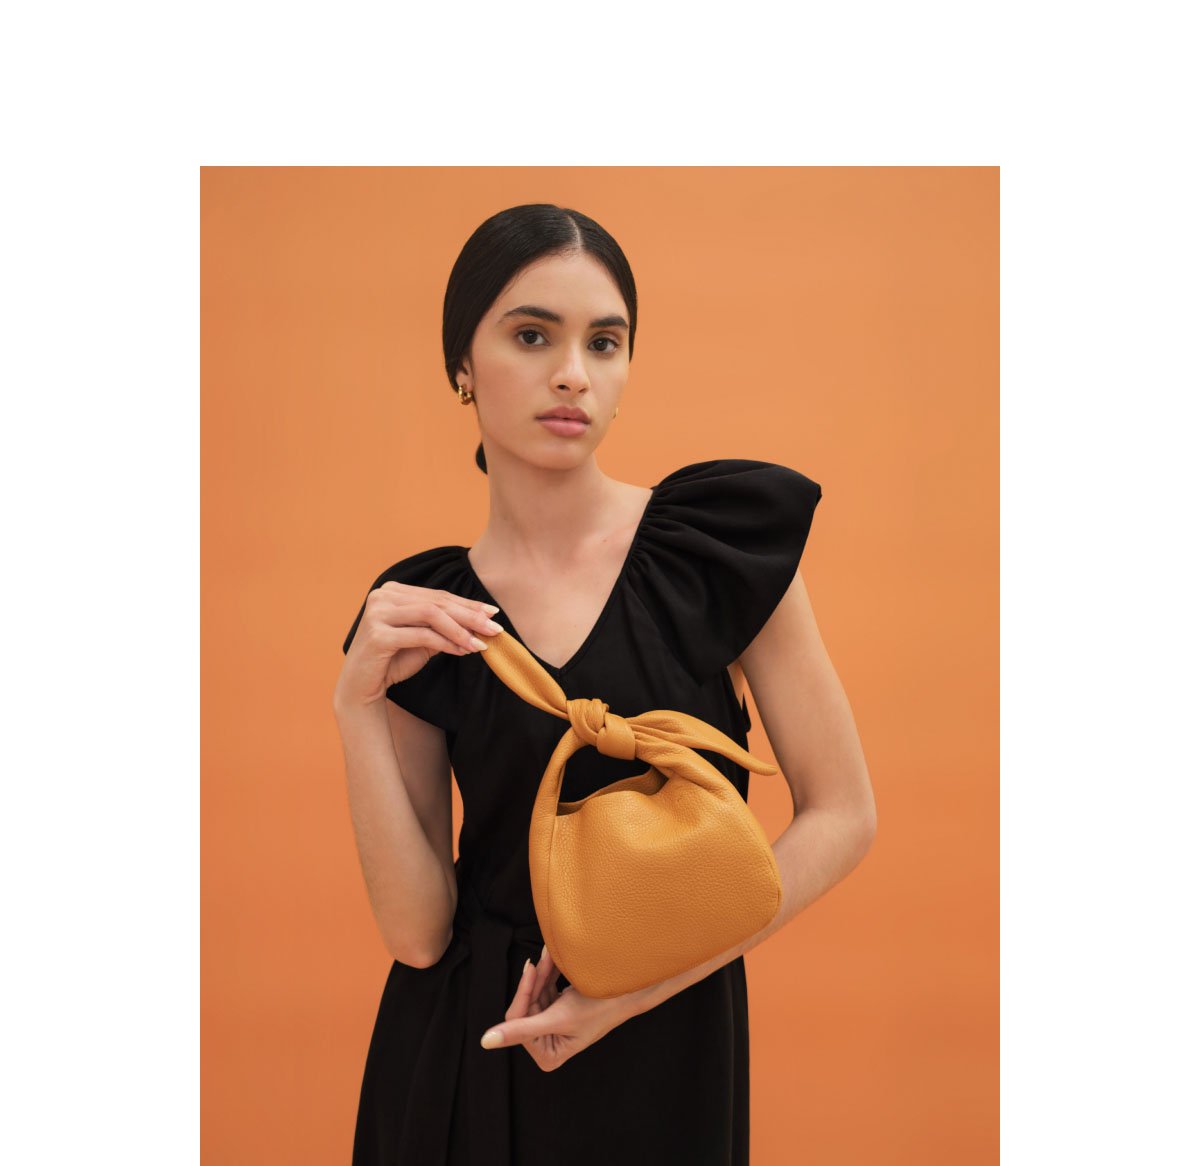 Cuyana: The Mini Bow Bag in New Summer Shades